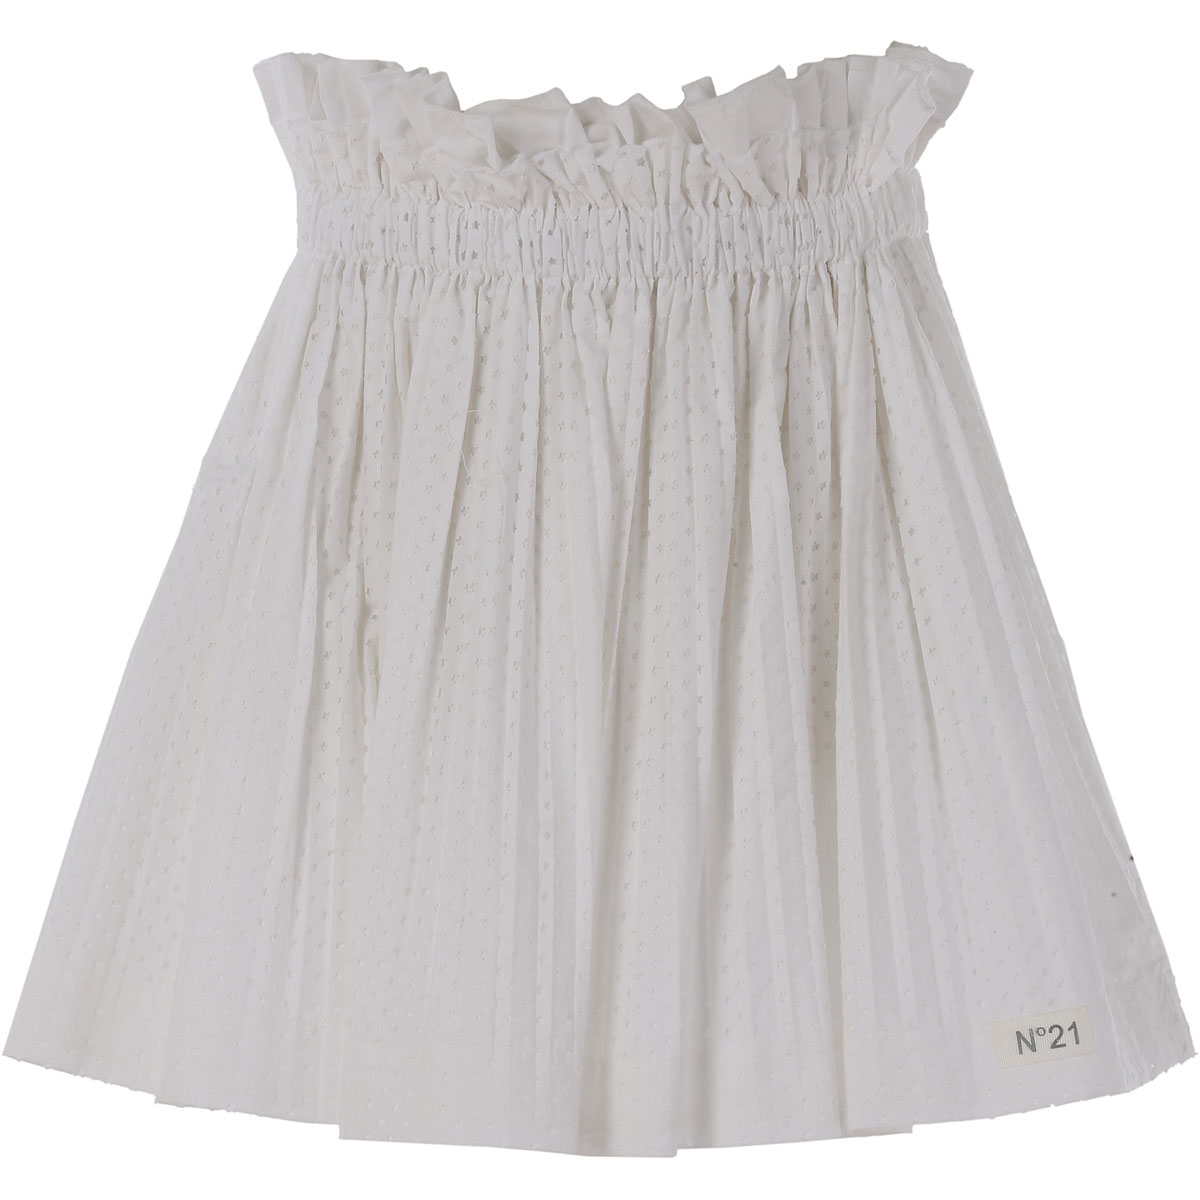 NO 21 Jupes Enfant pour Fille Outlet, Blanc, Coton, 2017, 30 (6 Years) 36 (9 Years) 38 (10 Years) 42